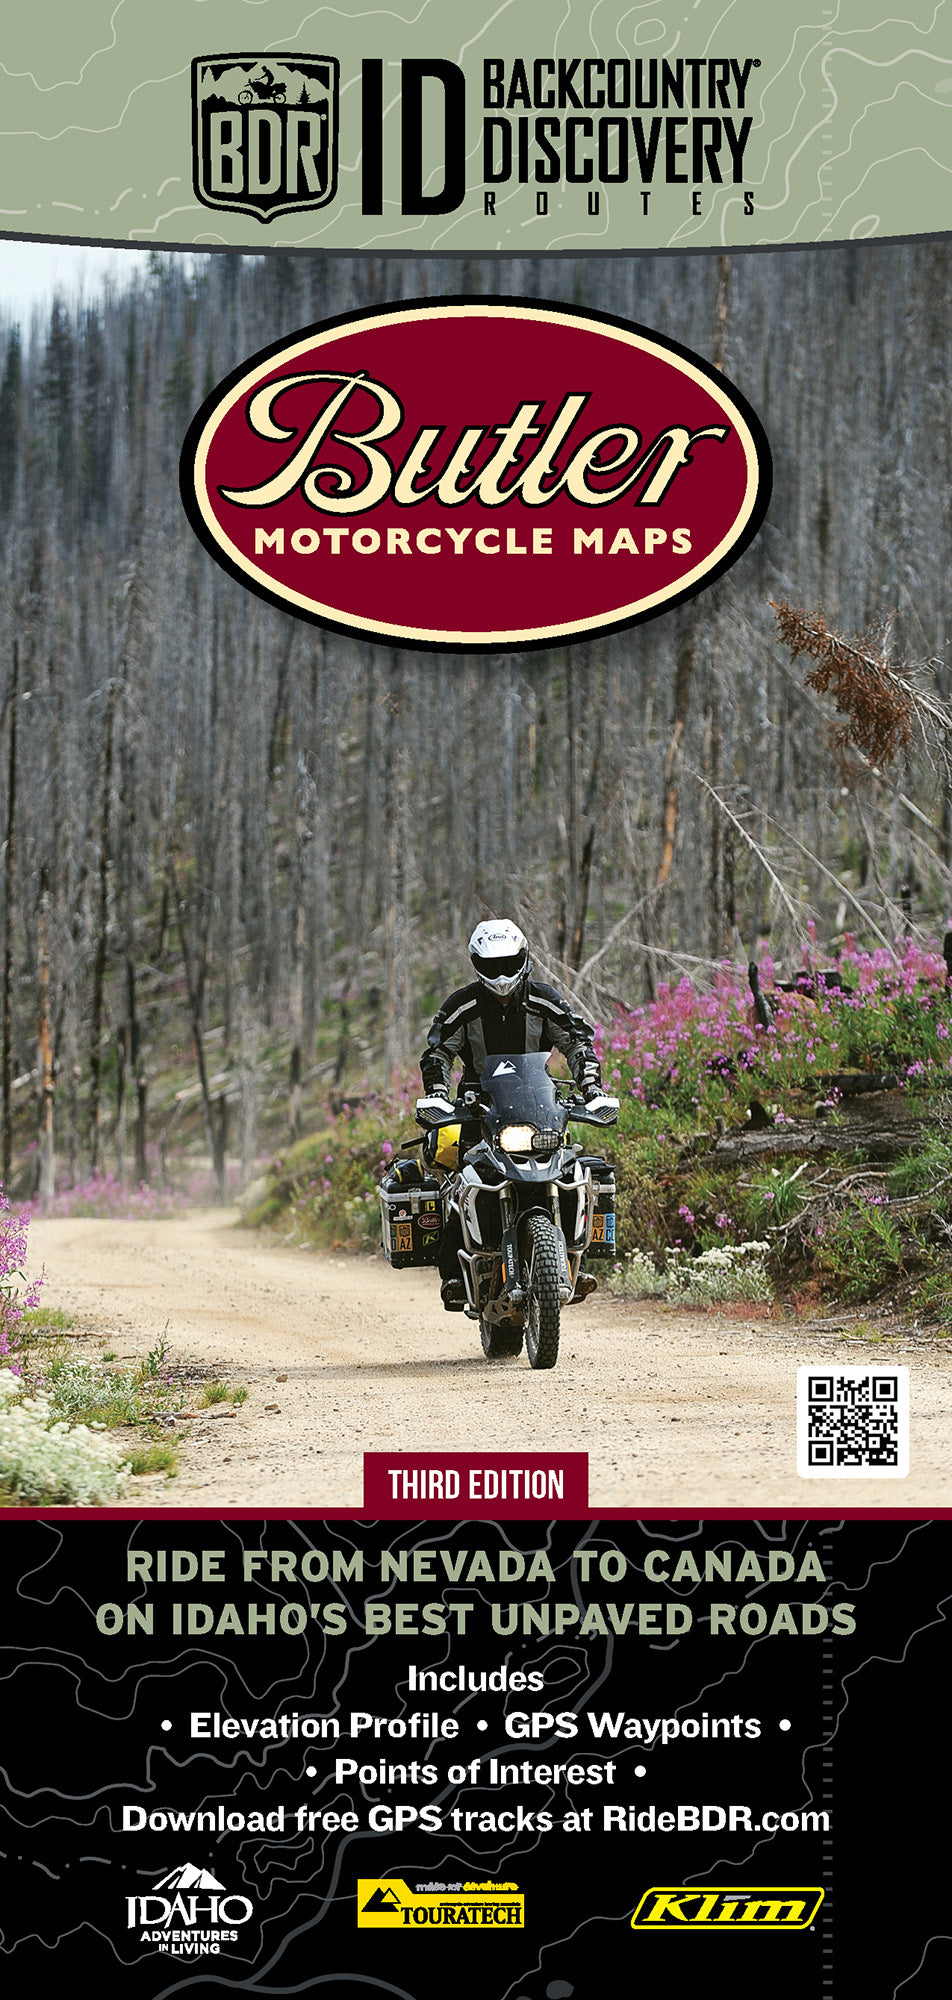 Idaho Backcountry Discovery Route (IDBDR) Map – V3